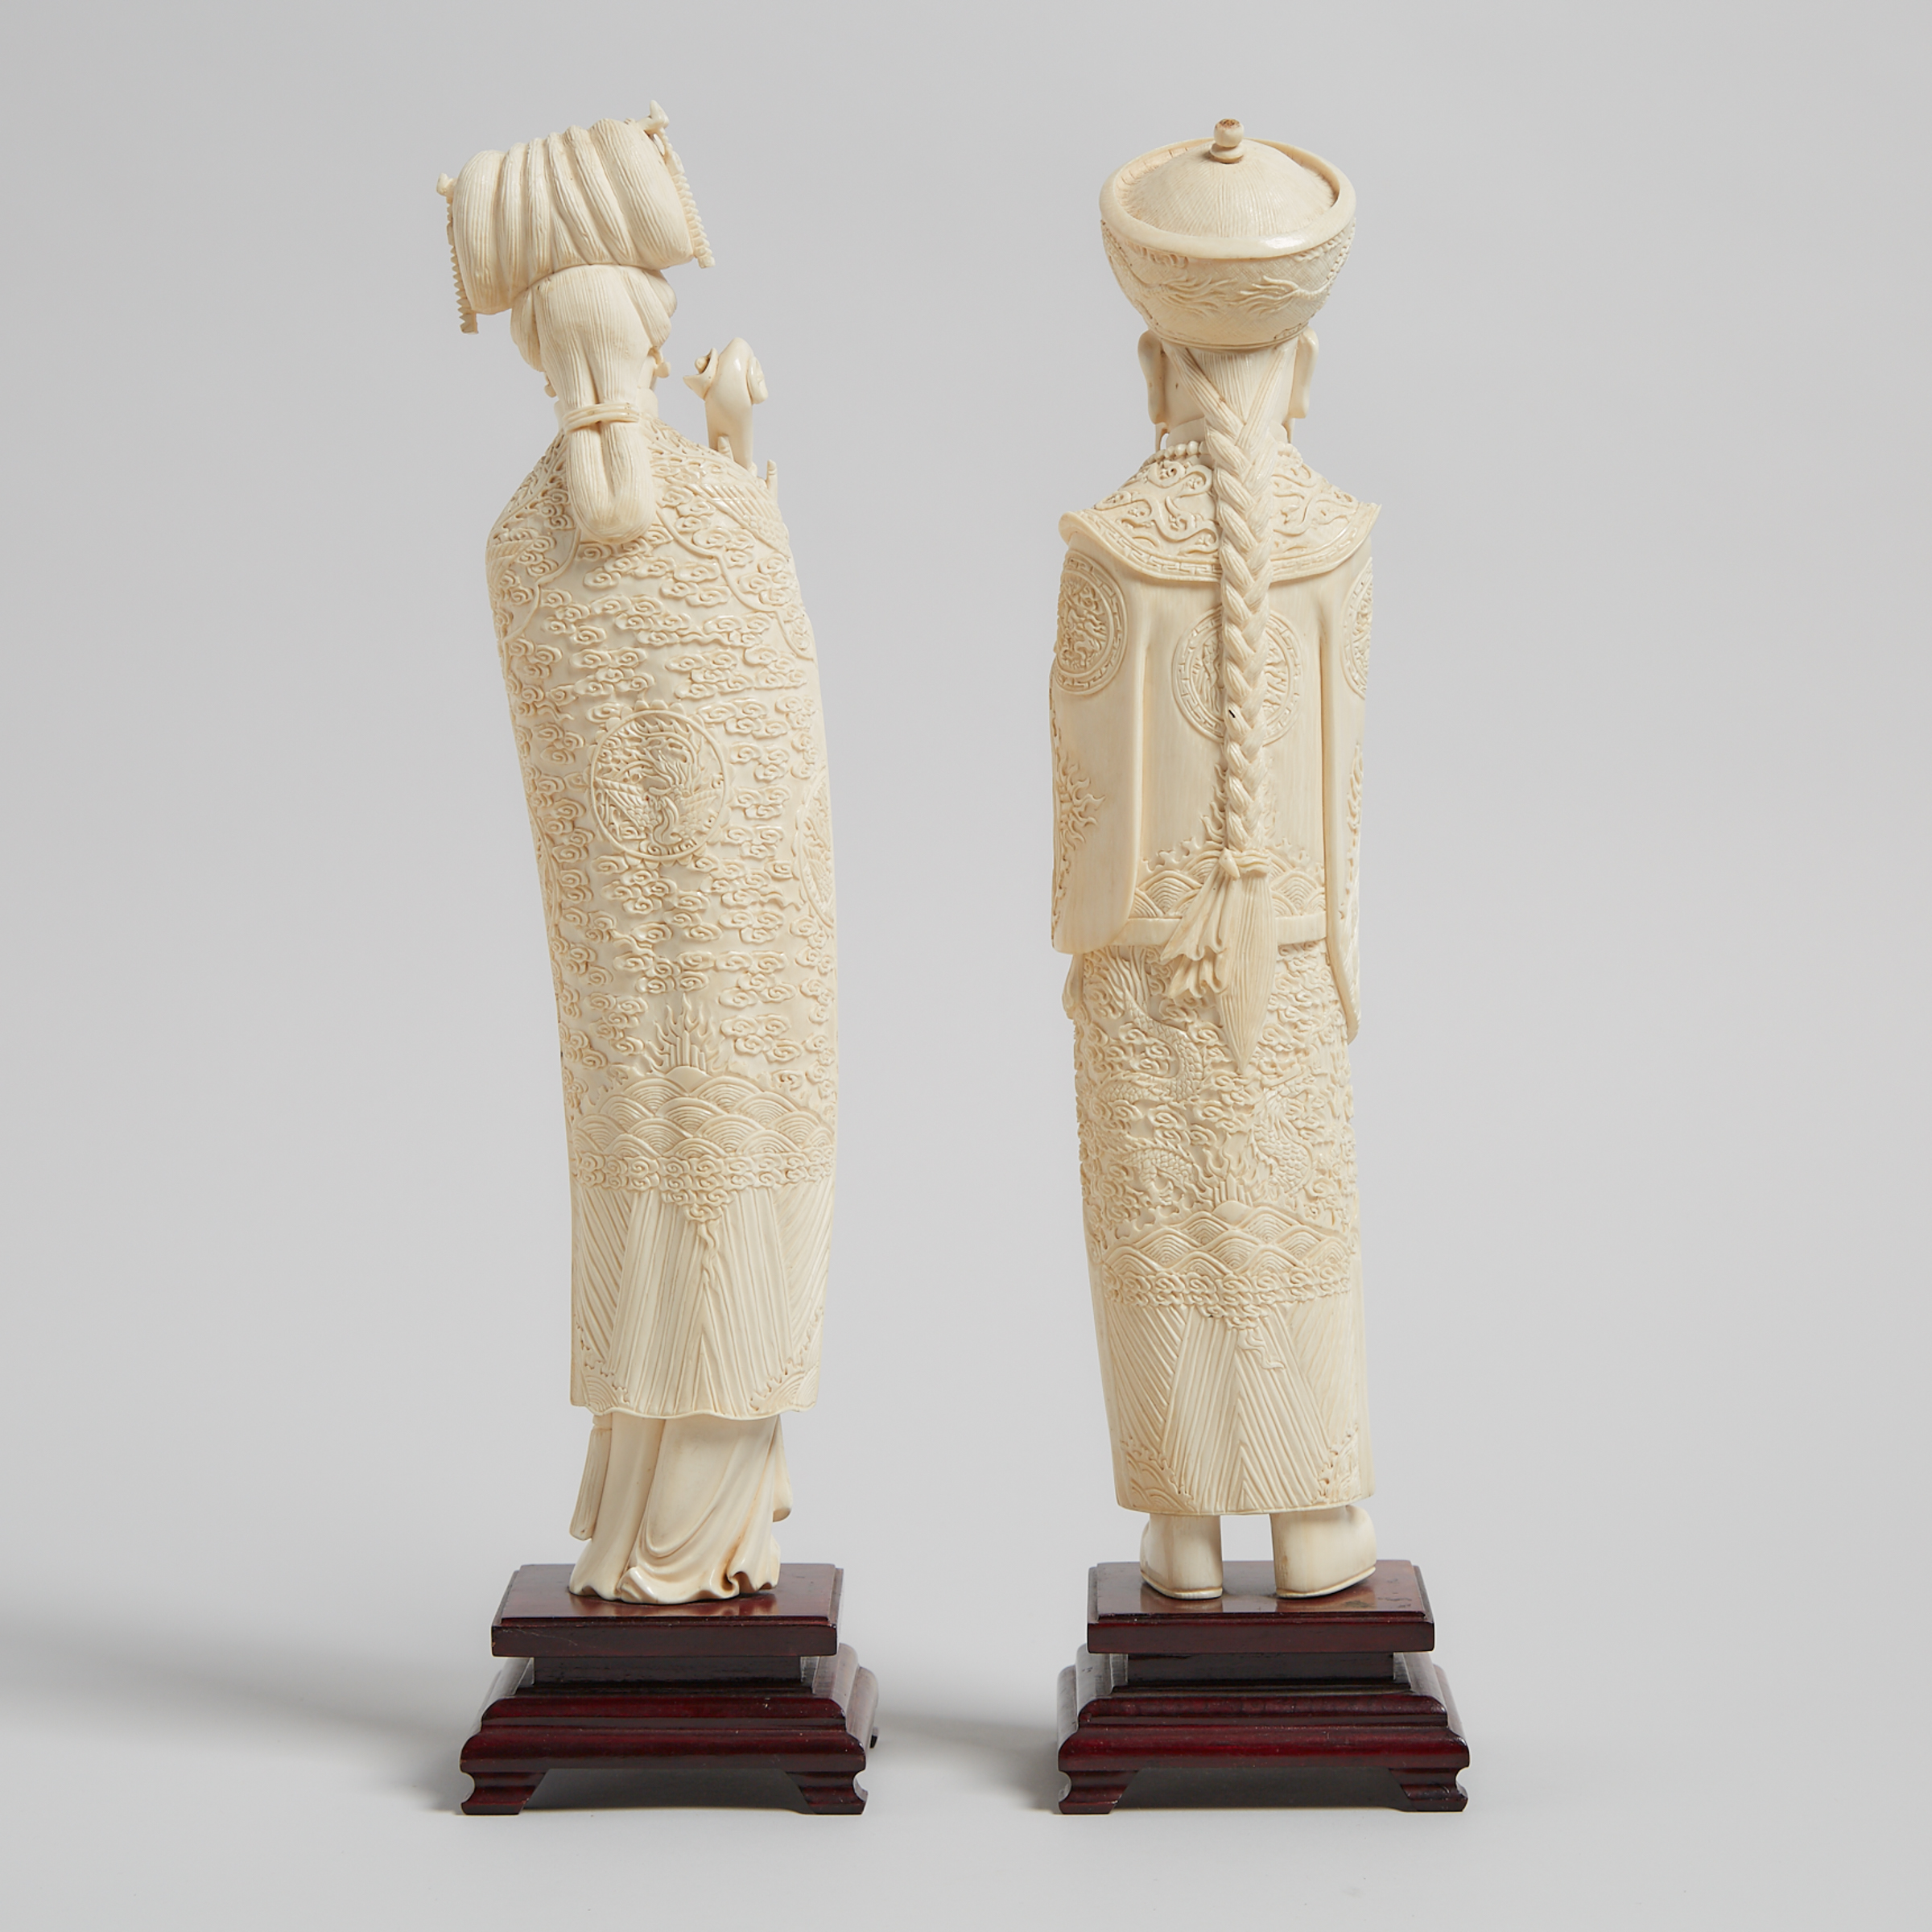 An Ivory Carved Emperor and Empress Pair, Circa 1940